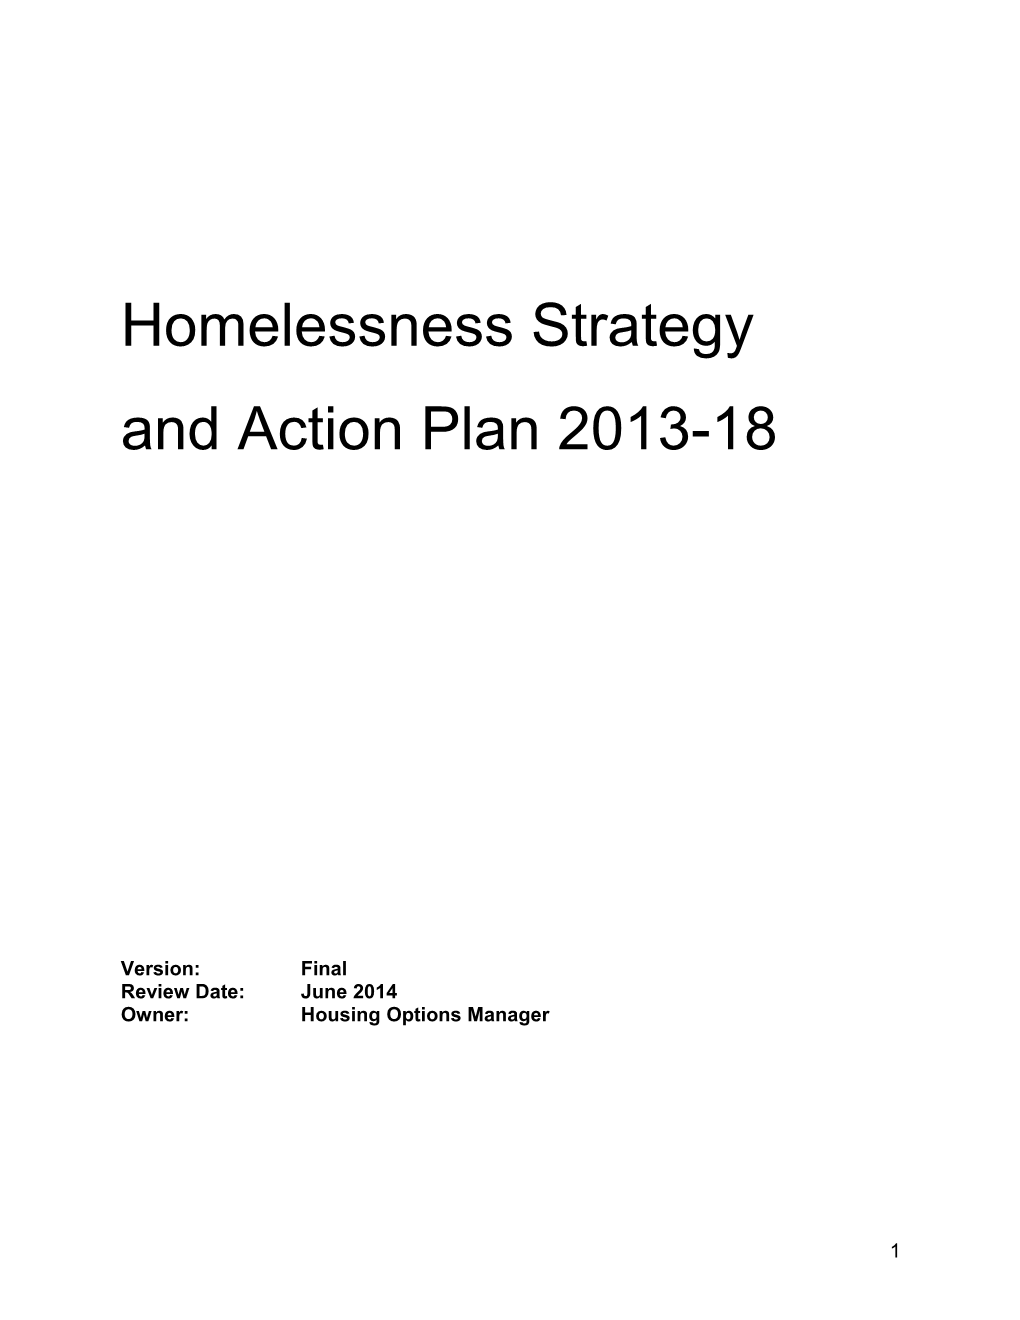 Homeless Strategy & Action Plan 2013 18